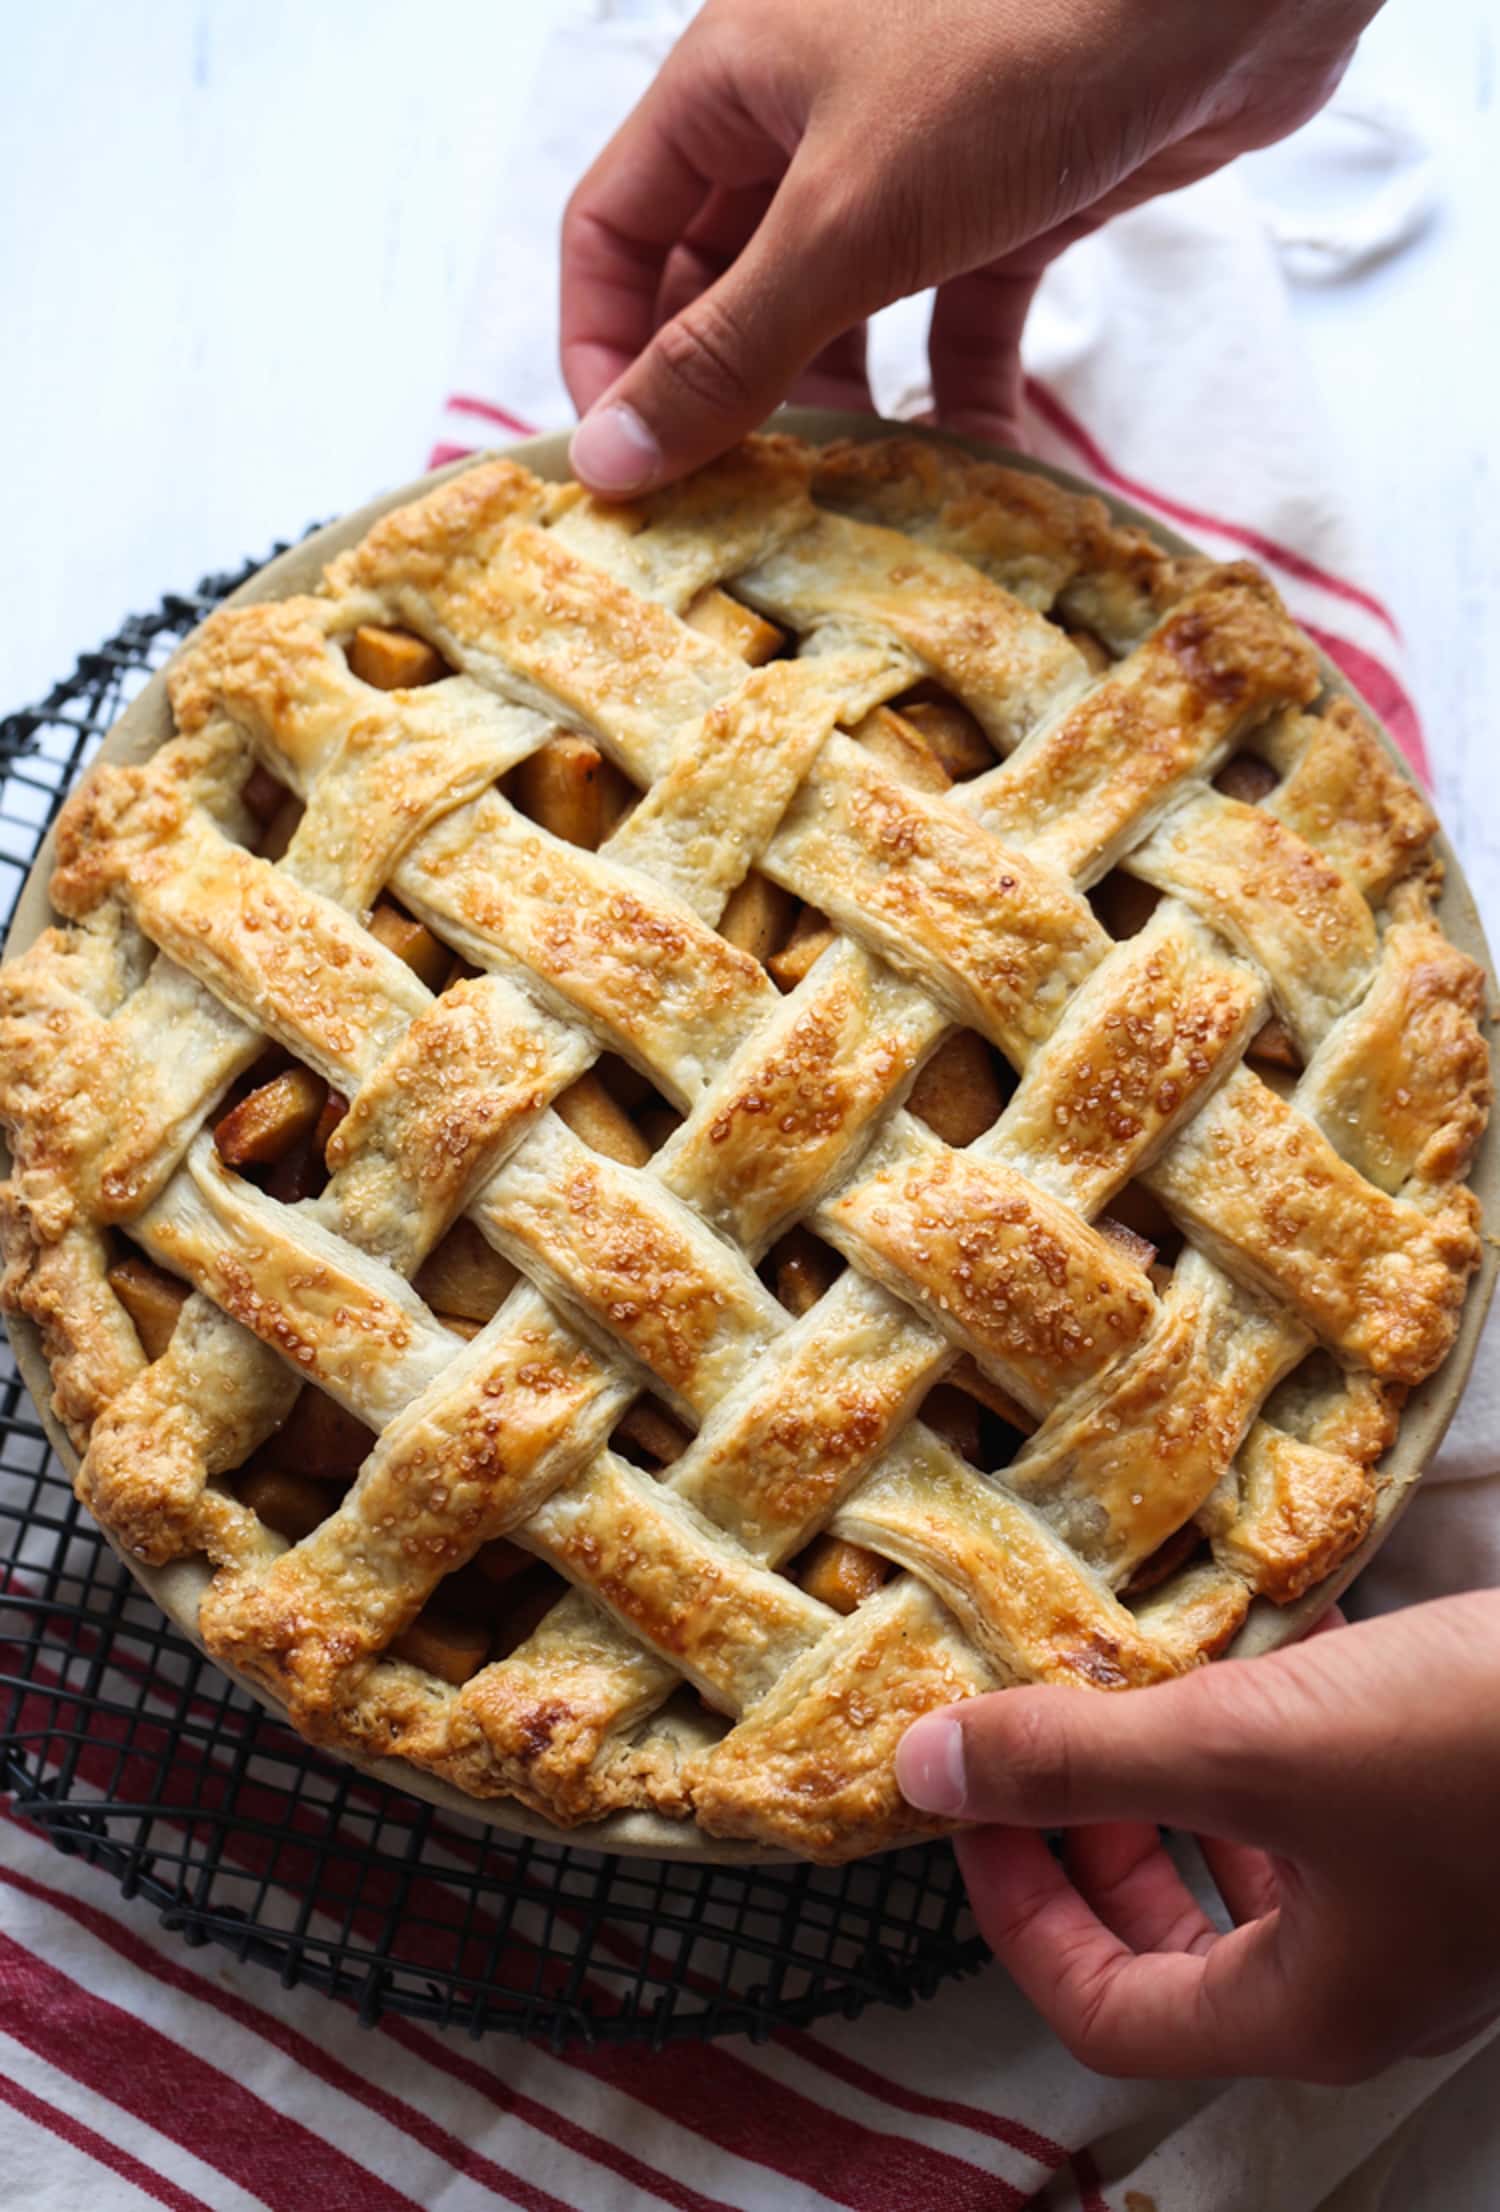 Overhead view of two hands setting down an baked apple pie with a lattice crust.